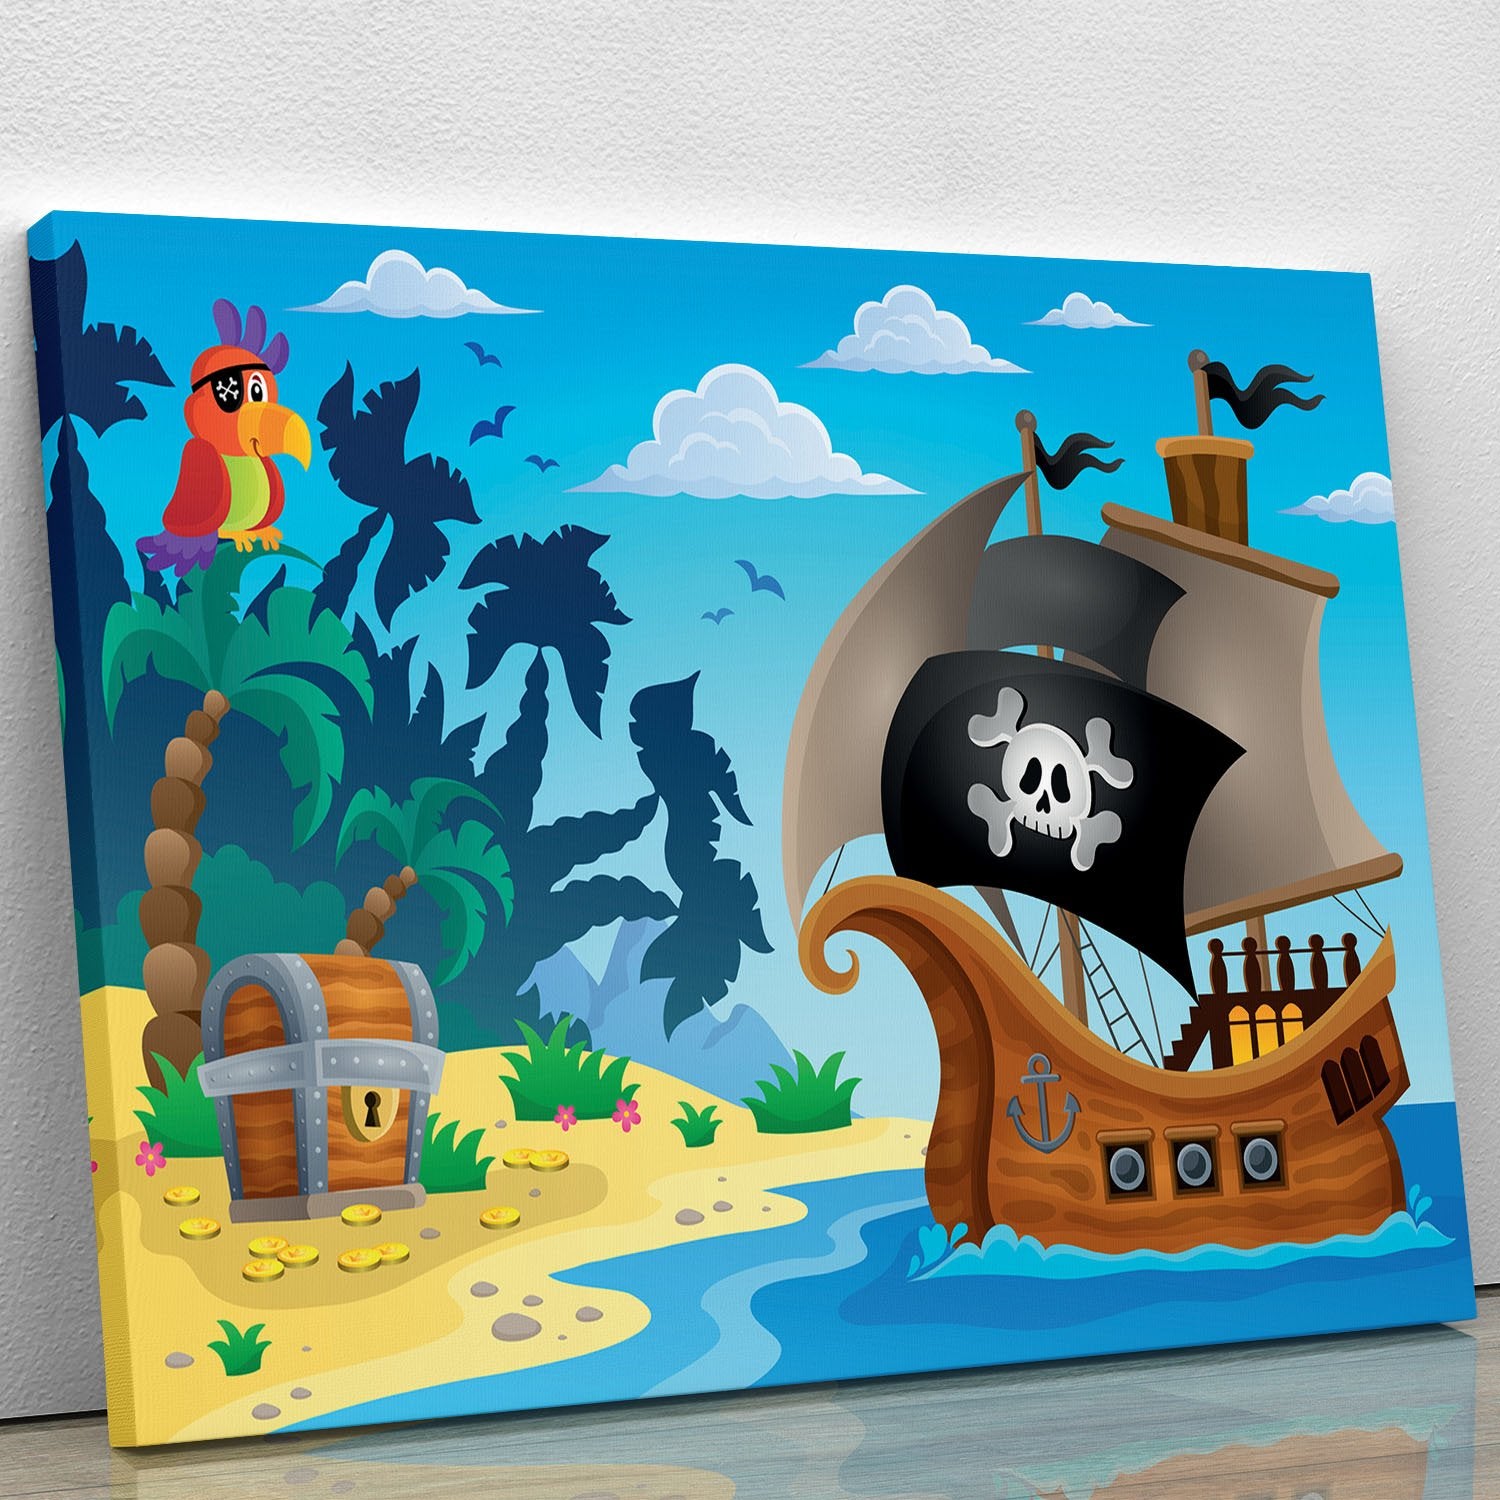 Pirate ship topic image 5 Canvas Print or Poster